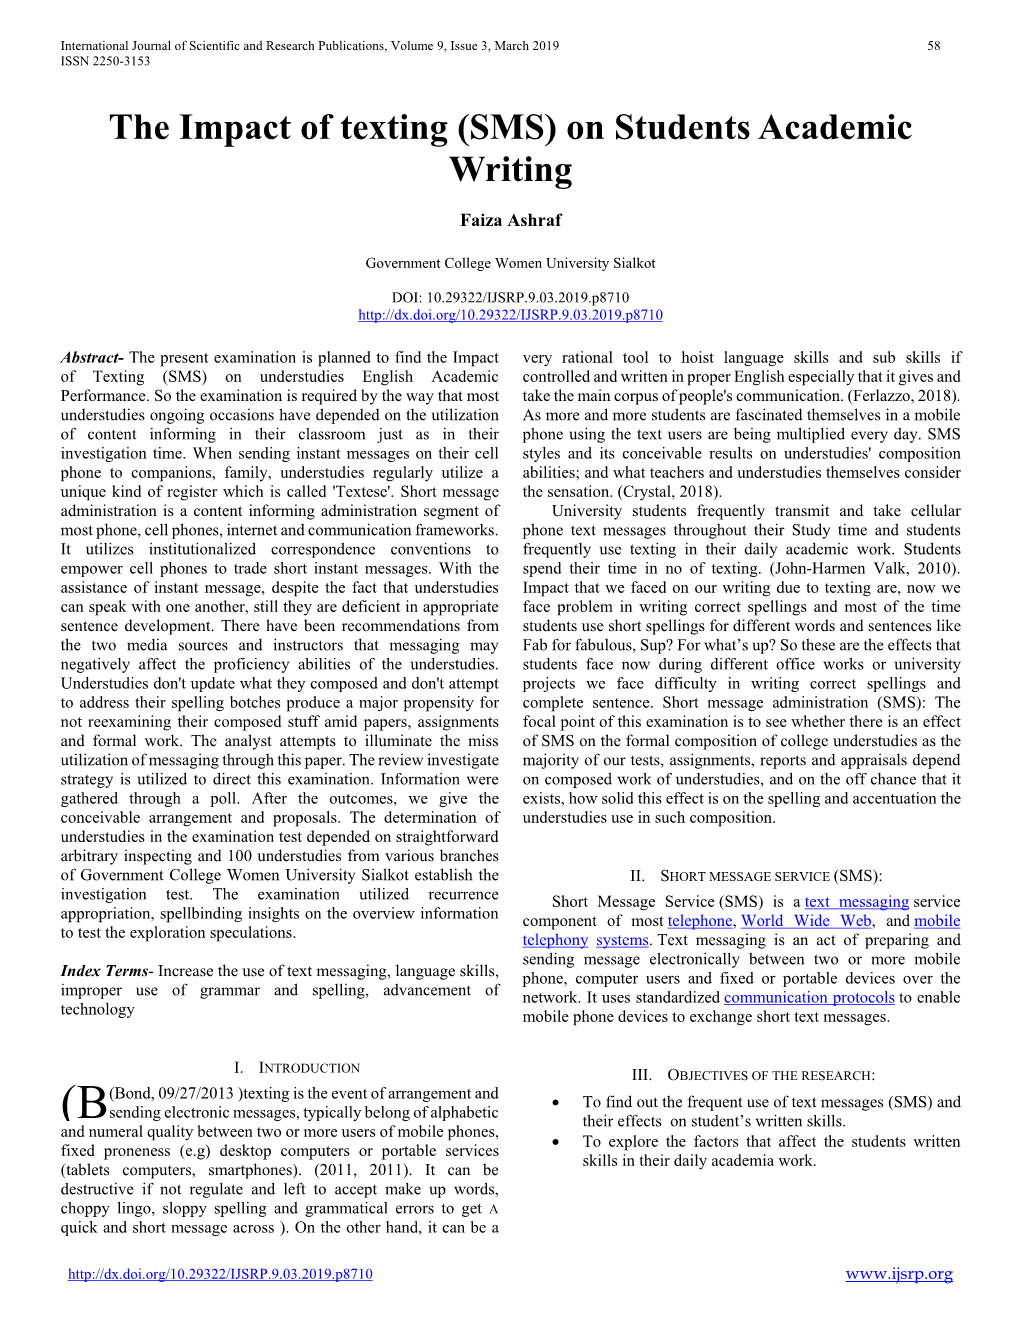 (SMS) on Students Academic Writing